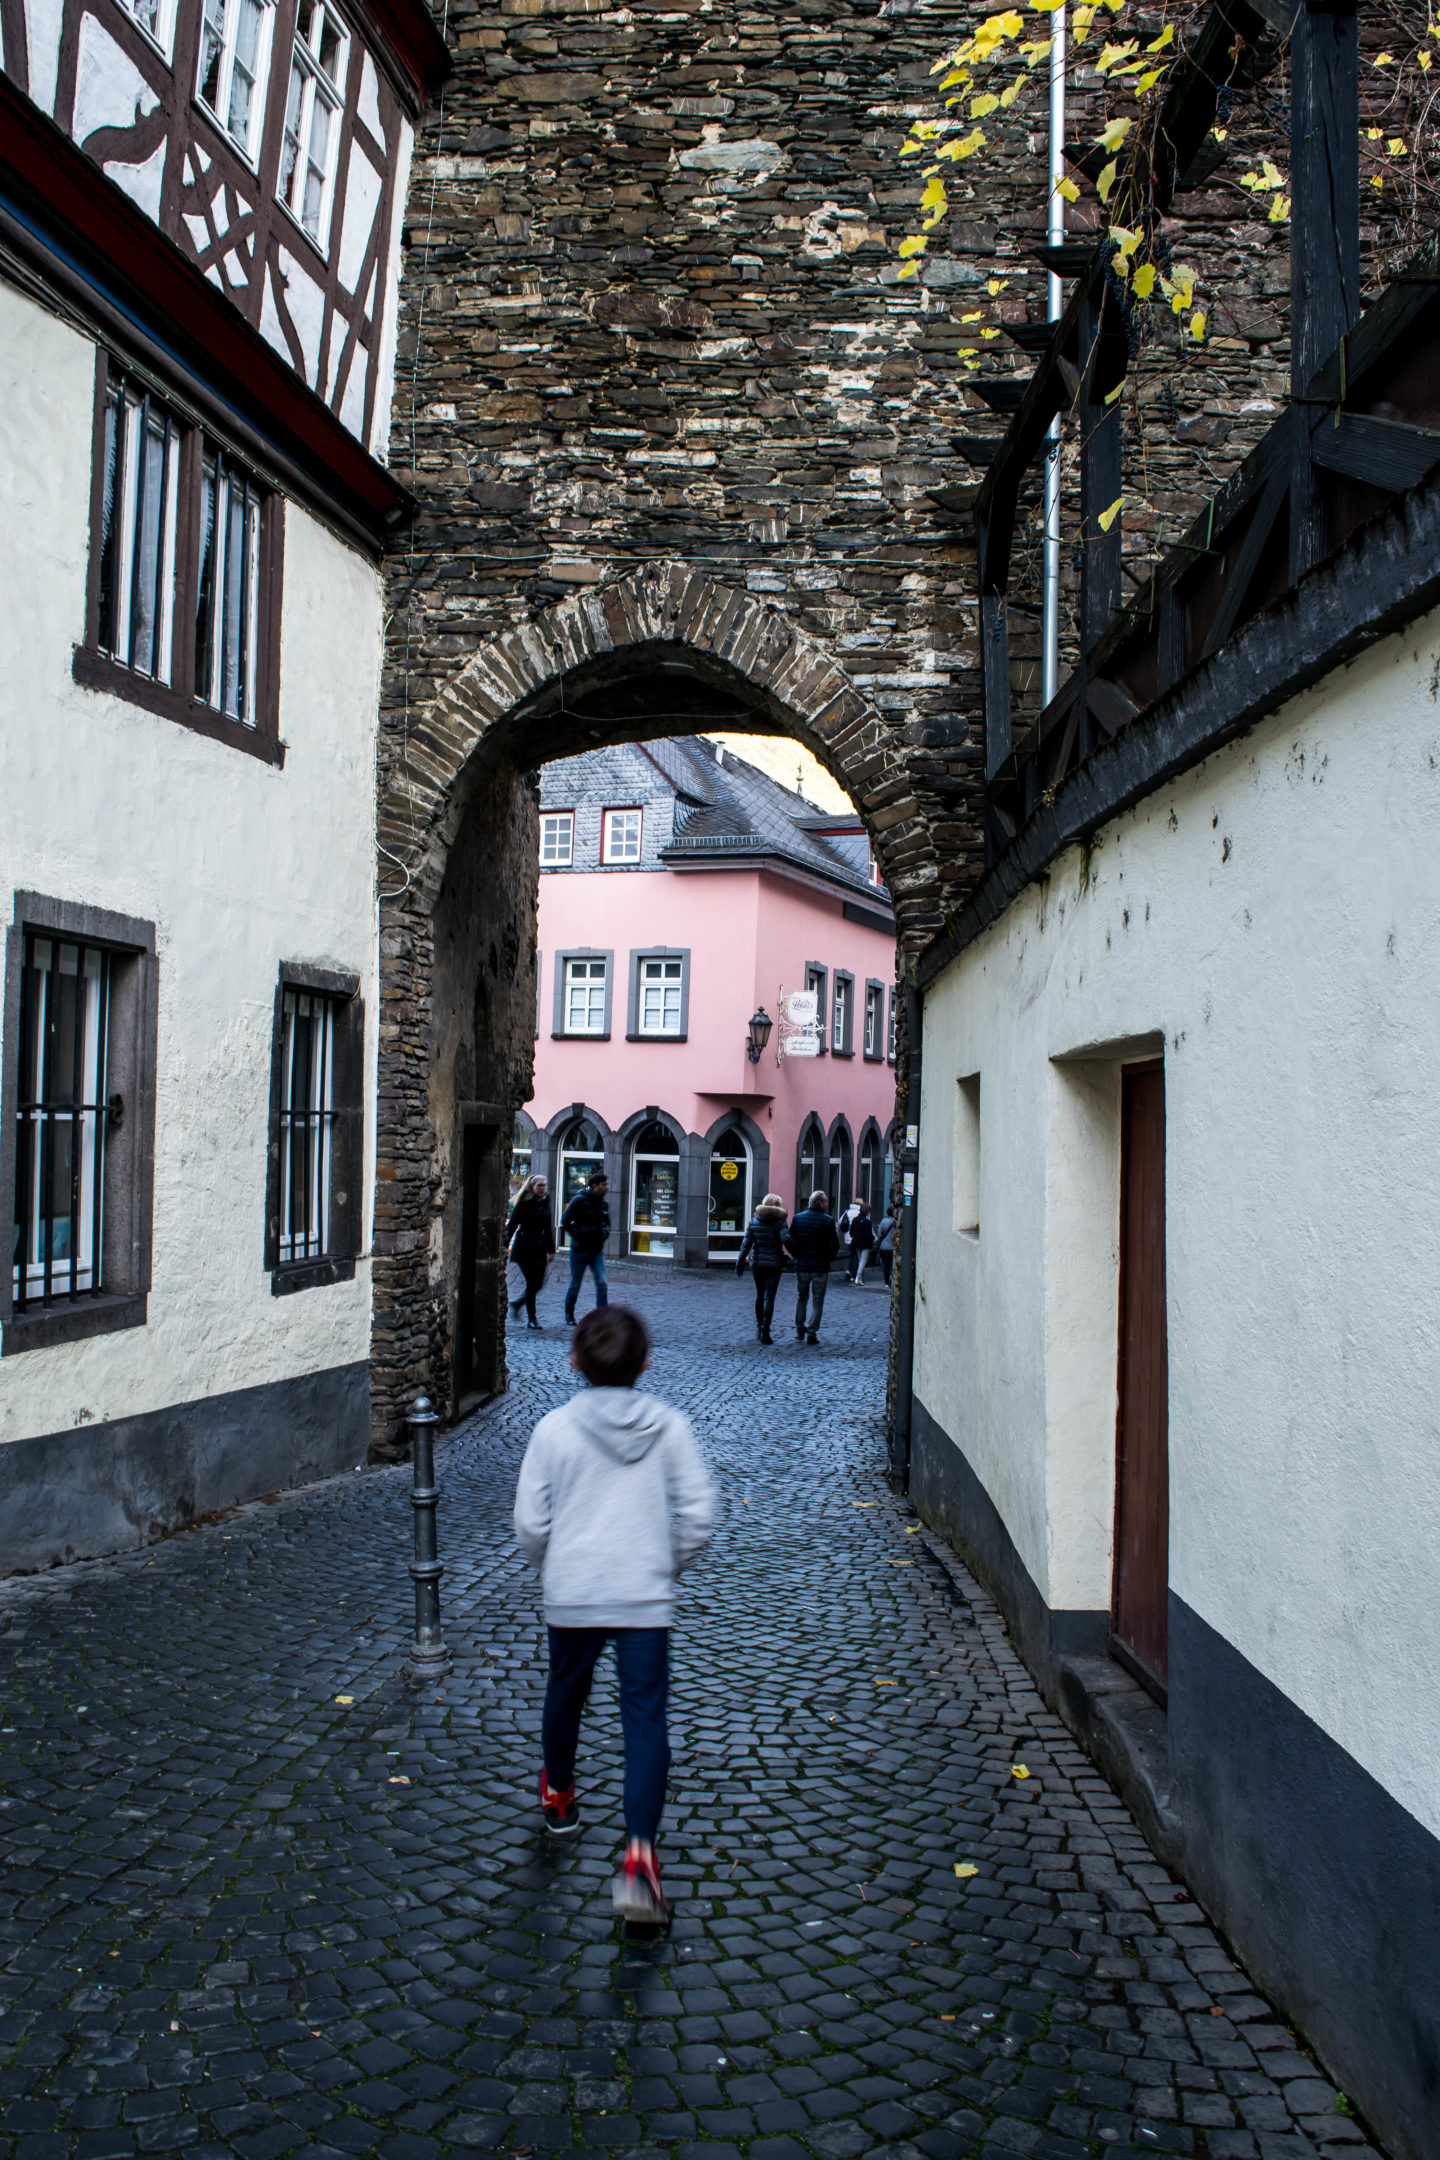 Exploring the town of Cochem on foot